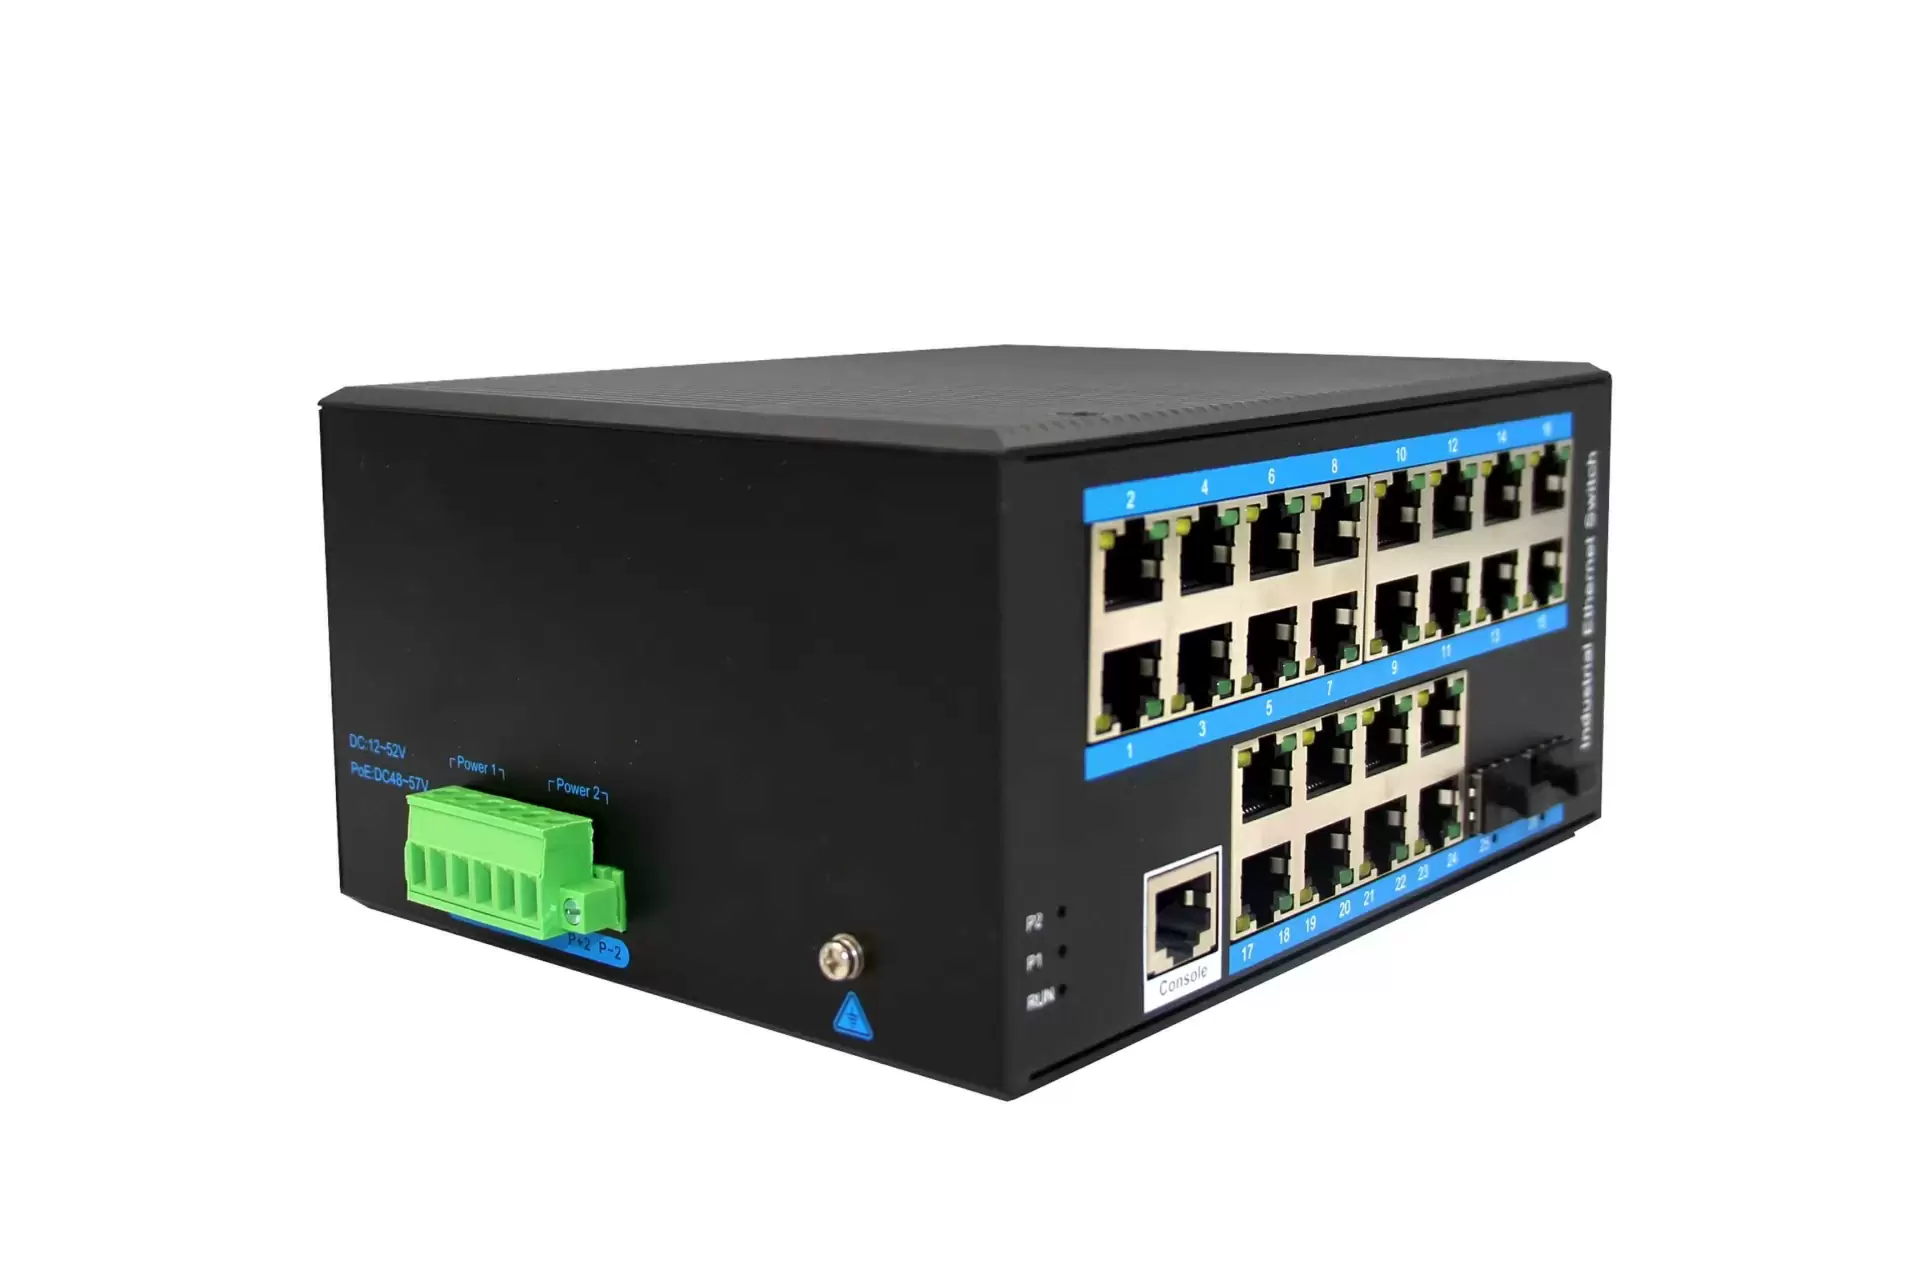 How to select a suitable industrial Ethernet switch?